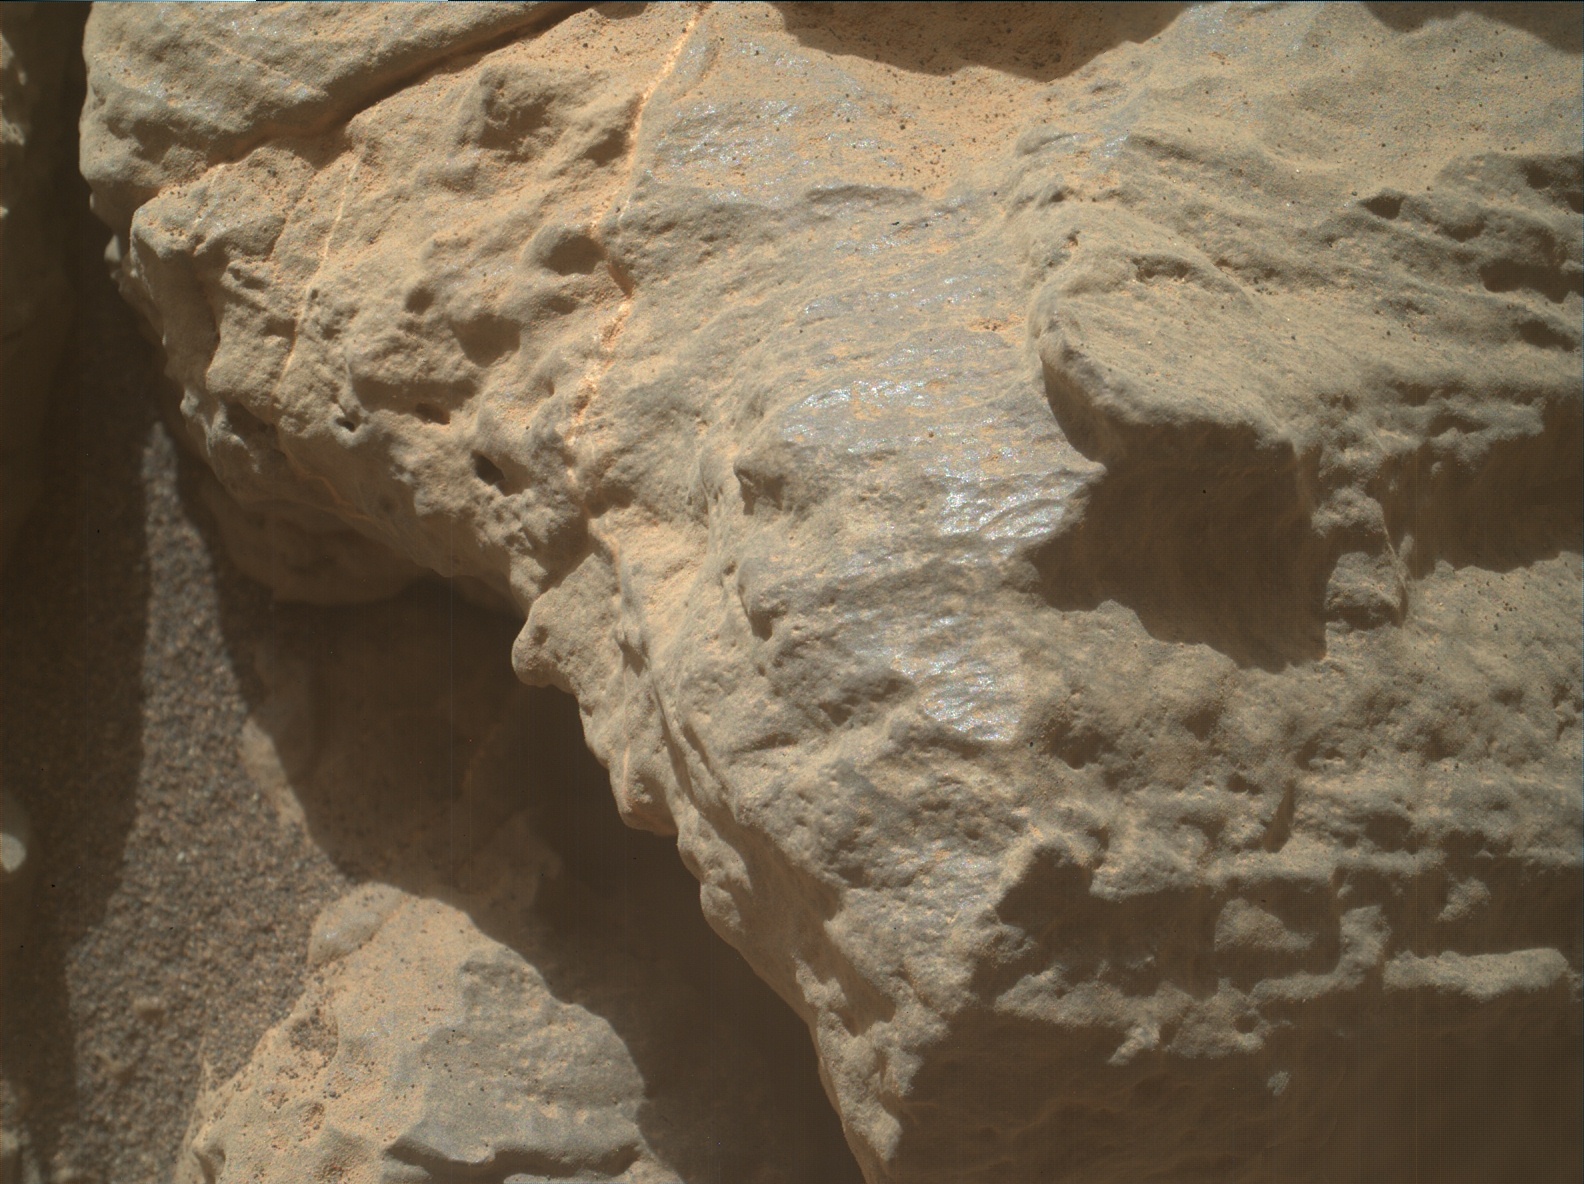 Nasa's Mars rover Curiosity acquired this image using its Mars Hand Lens Imager (MAHLI) on Sol 3544